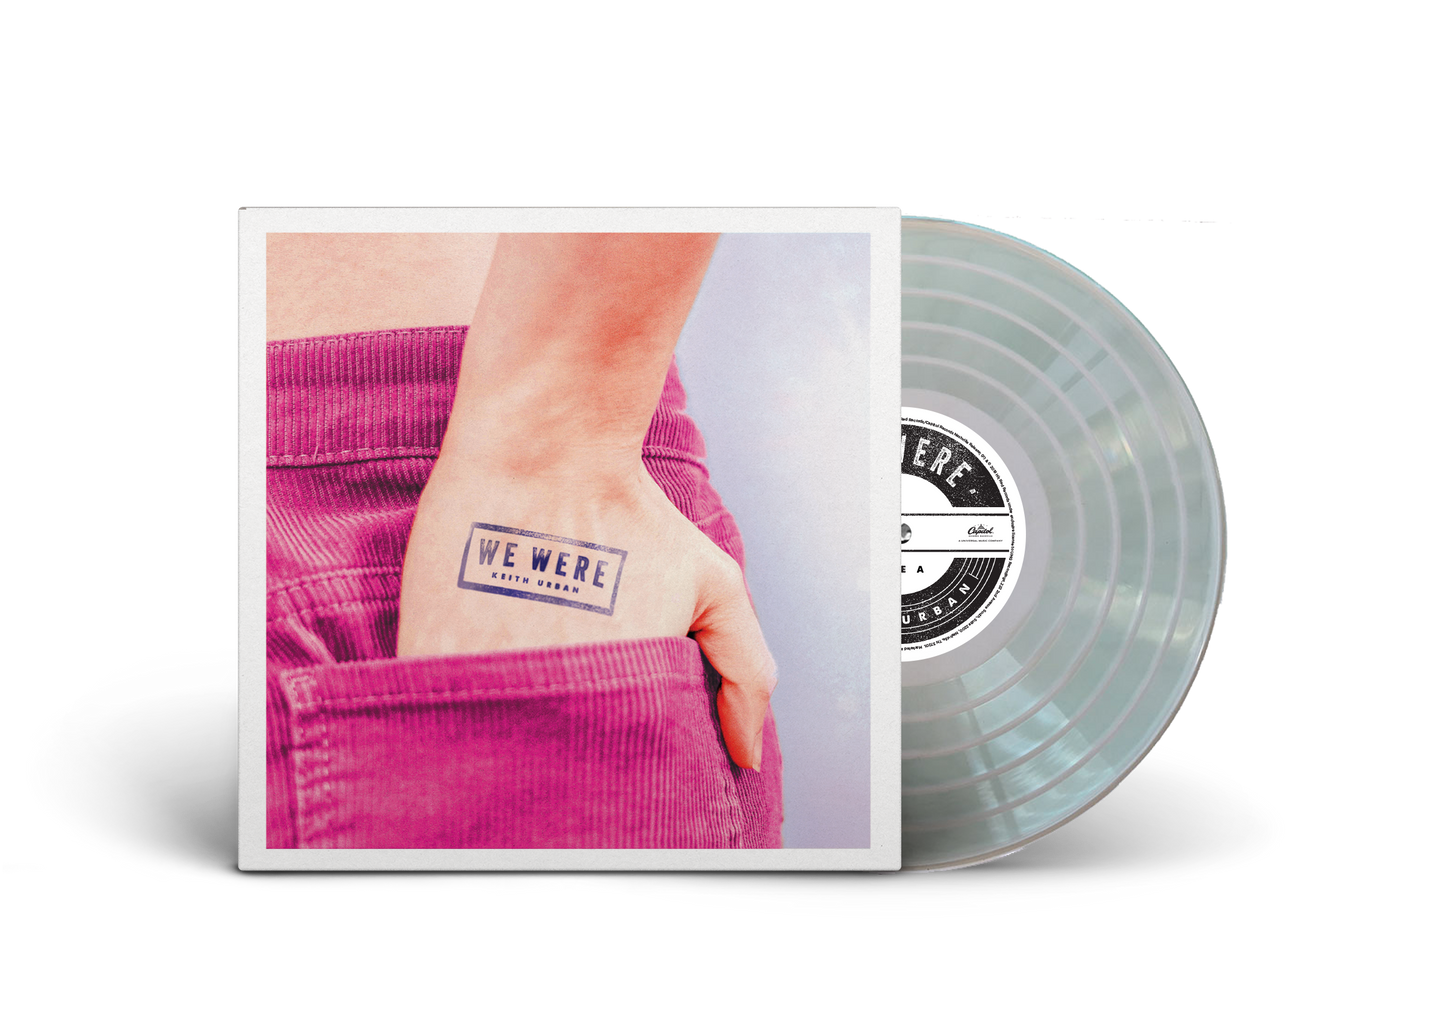 "We Were" Pink Cover with Clear 7" Vinyl